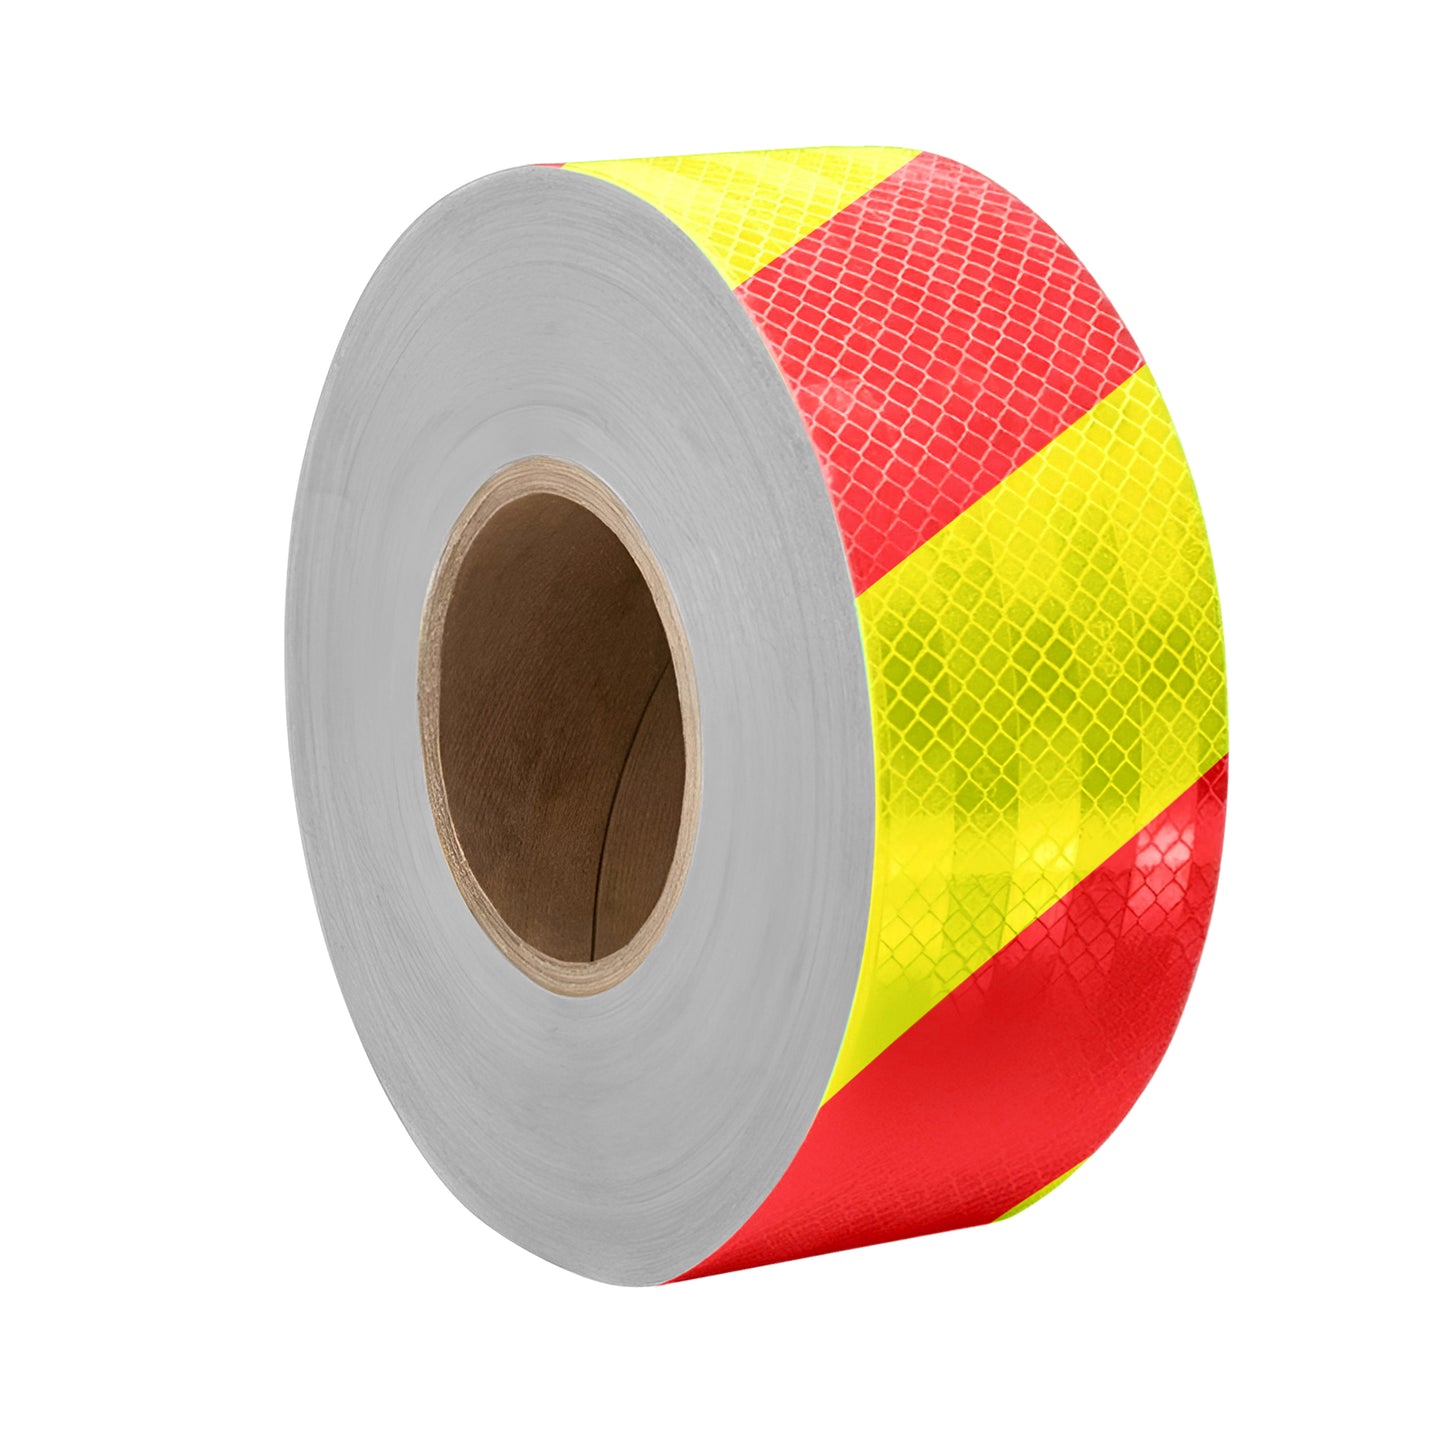 Reflective Safety Waterproof Tape